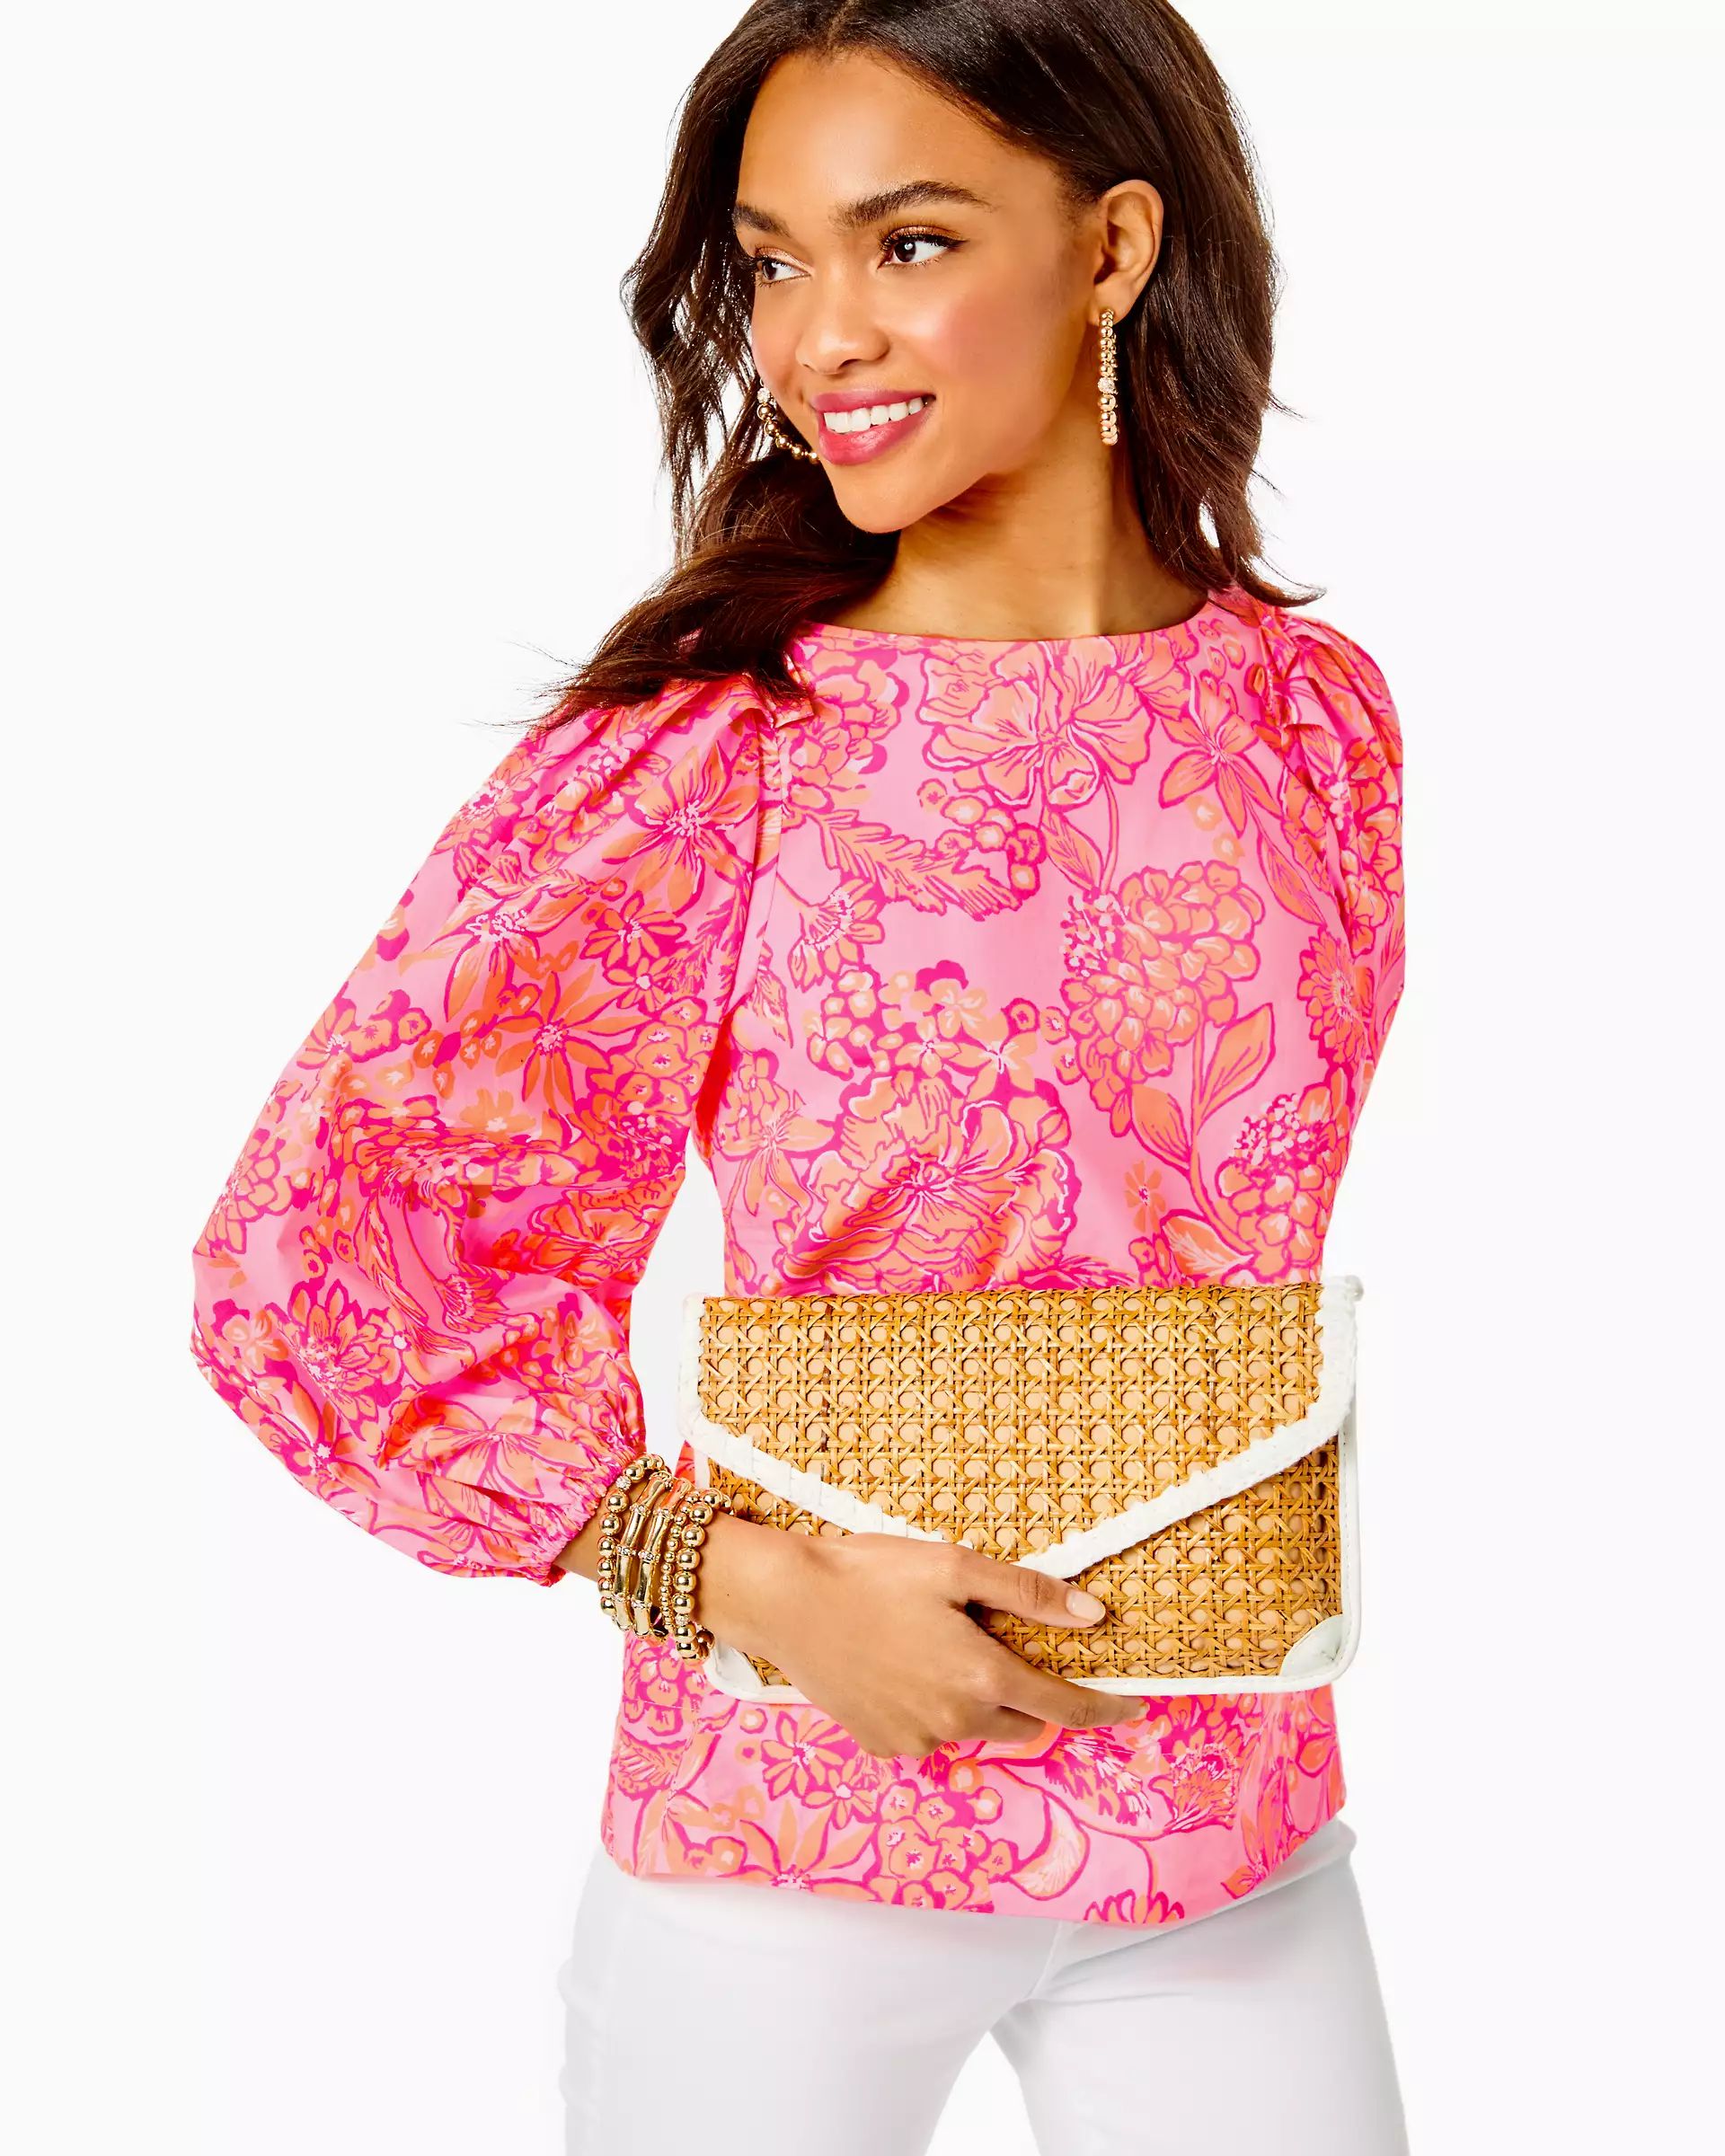 St. Barts Cane Clutch | Lilly Pulitzer | Lilly Pulitzer